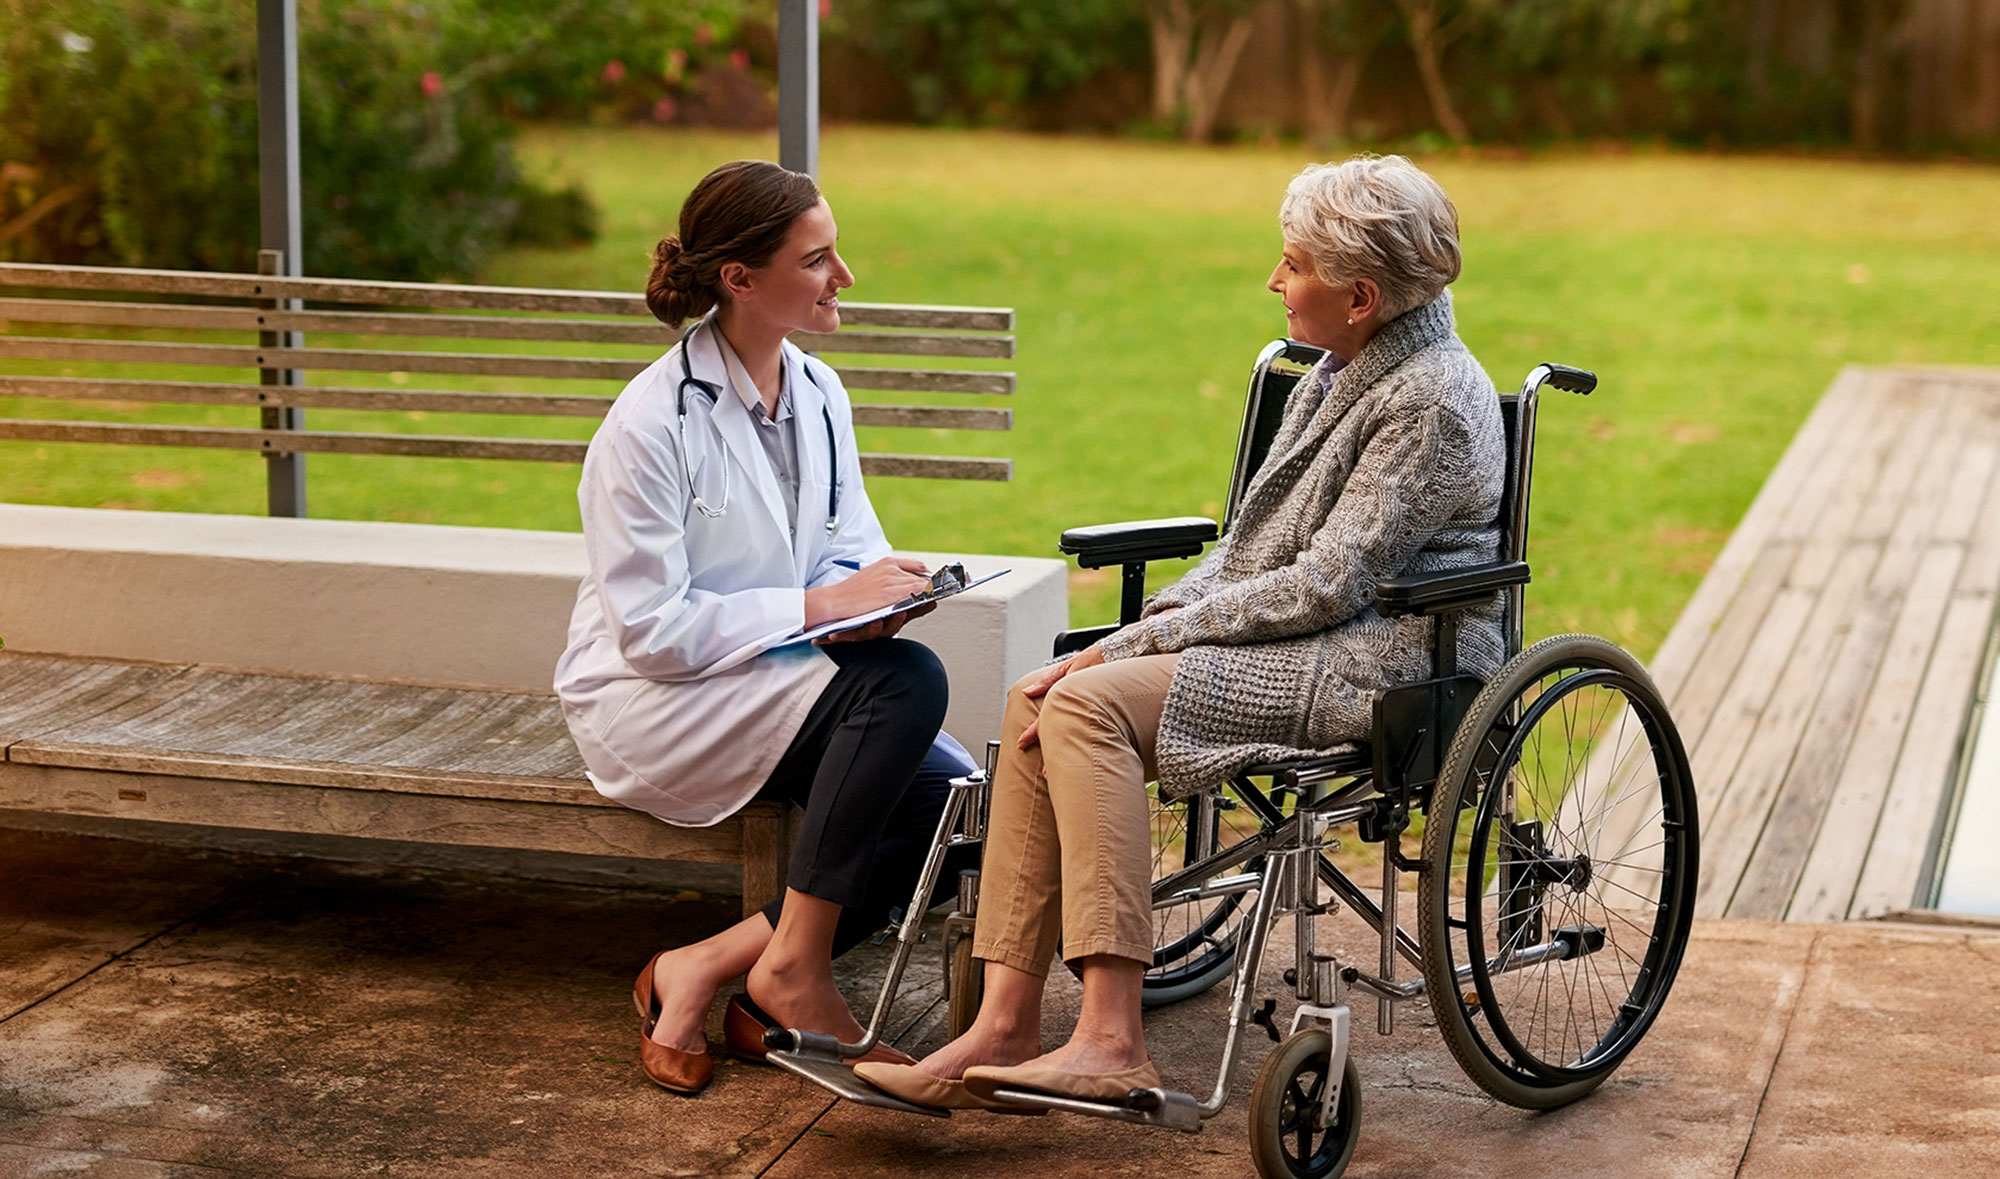 Our Glennan Center for Geriatrics and Gerontology team provides compassionate care for patients.